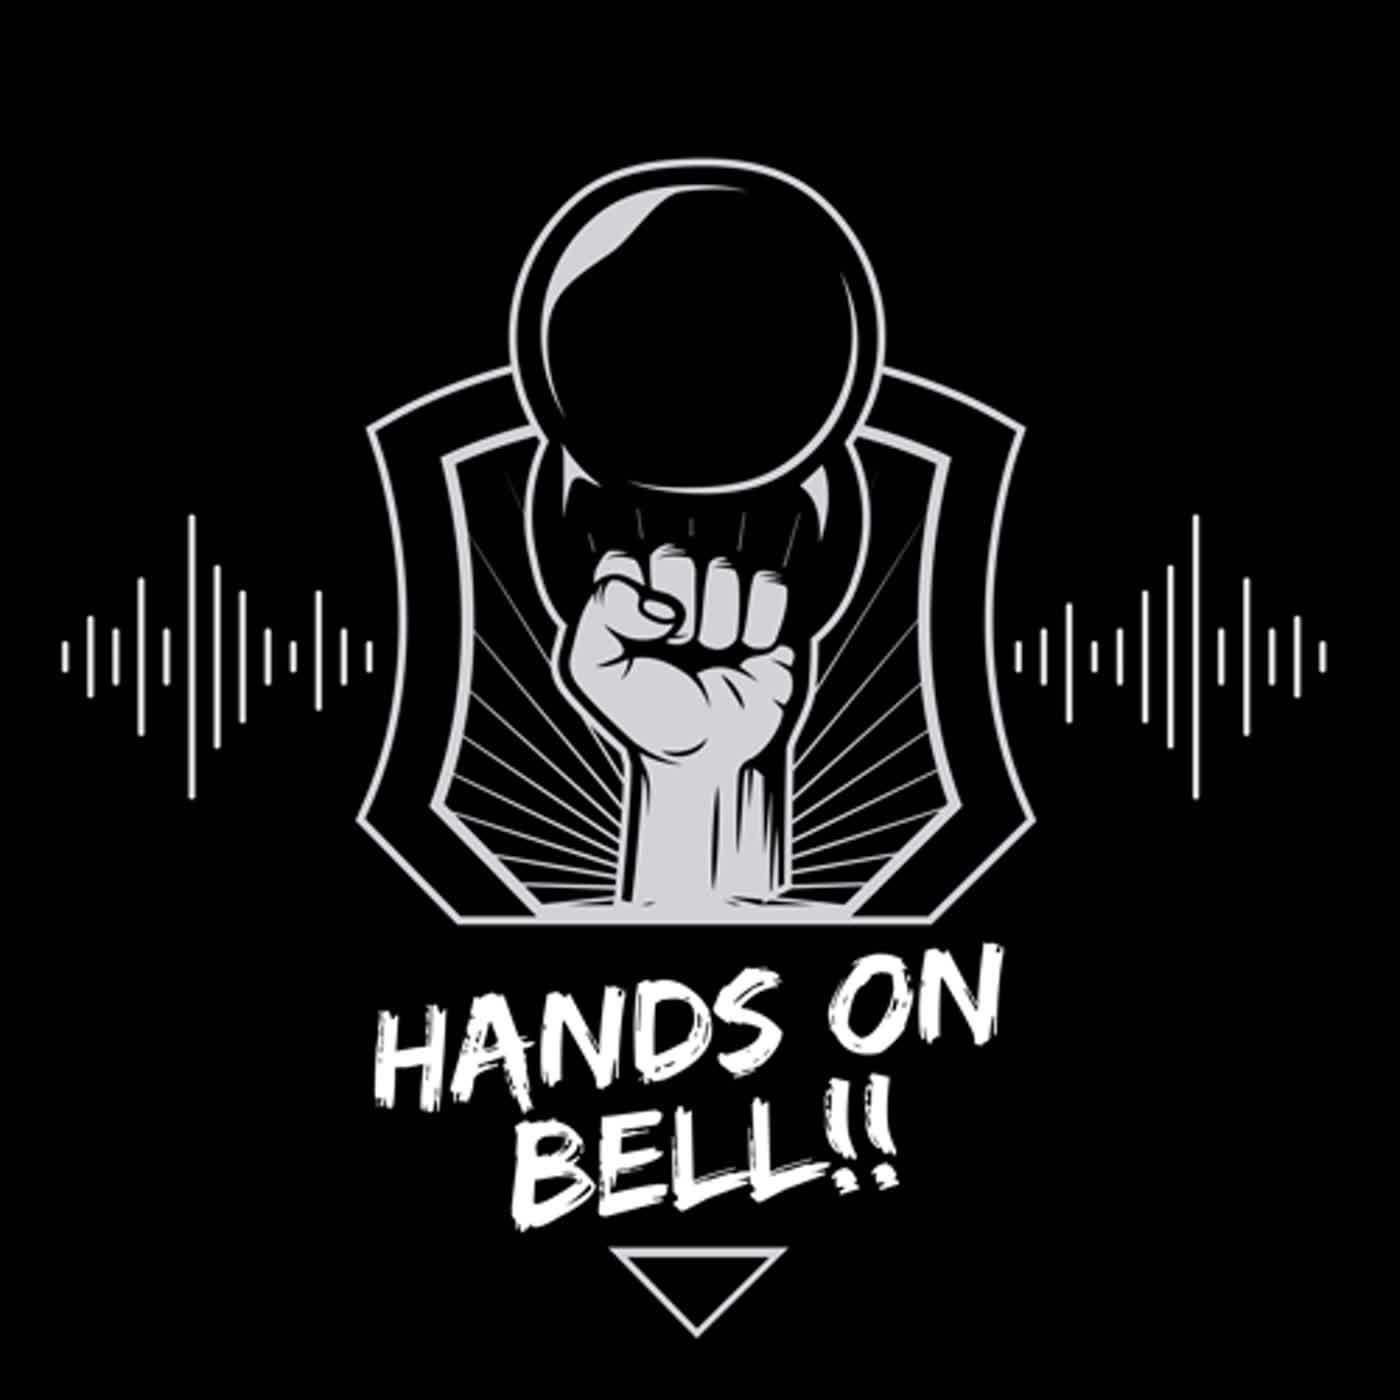 Hands on bell !!